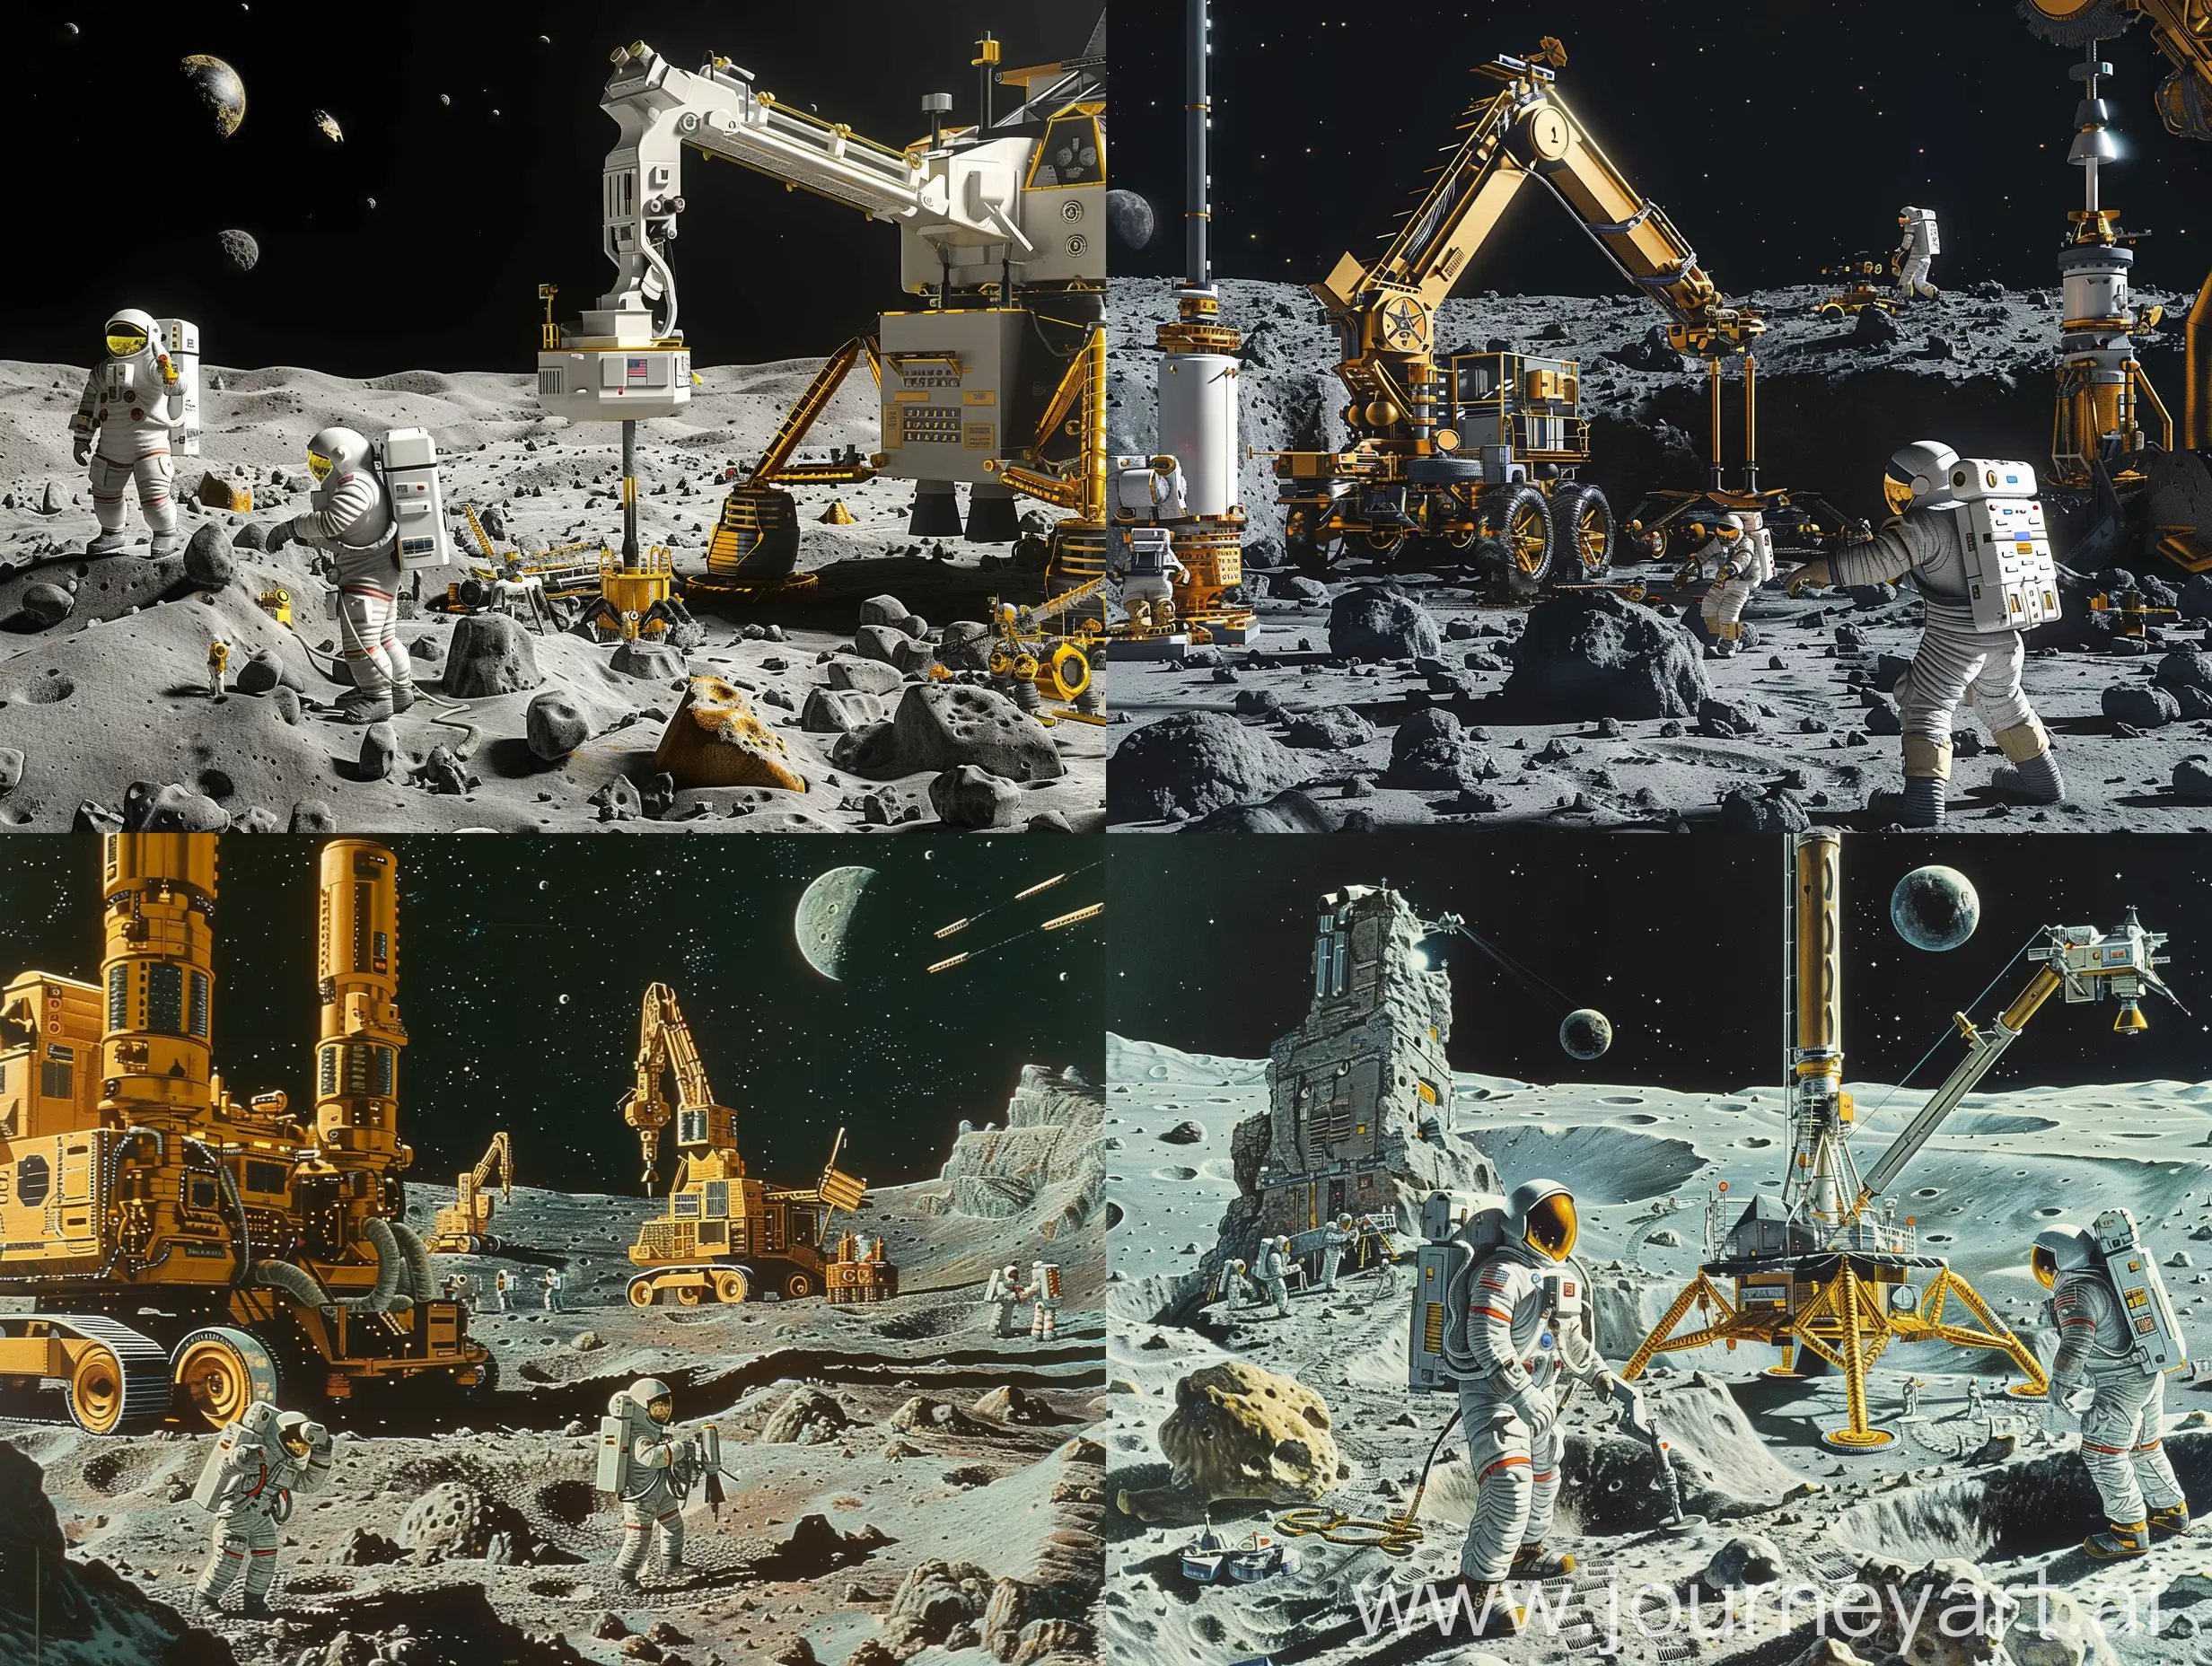 HighTech-Lunar-Drilling-Operation-with-Astronauts-and-Intelligent-Machines